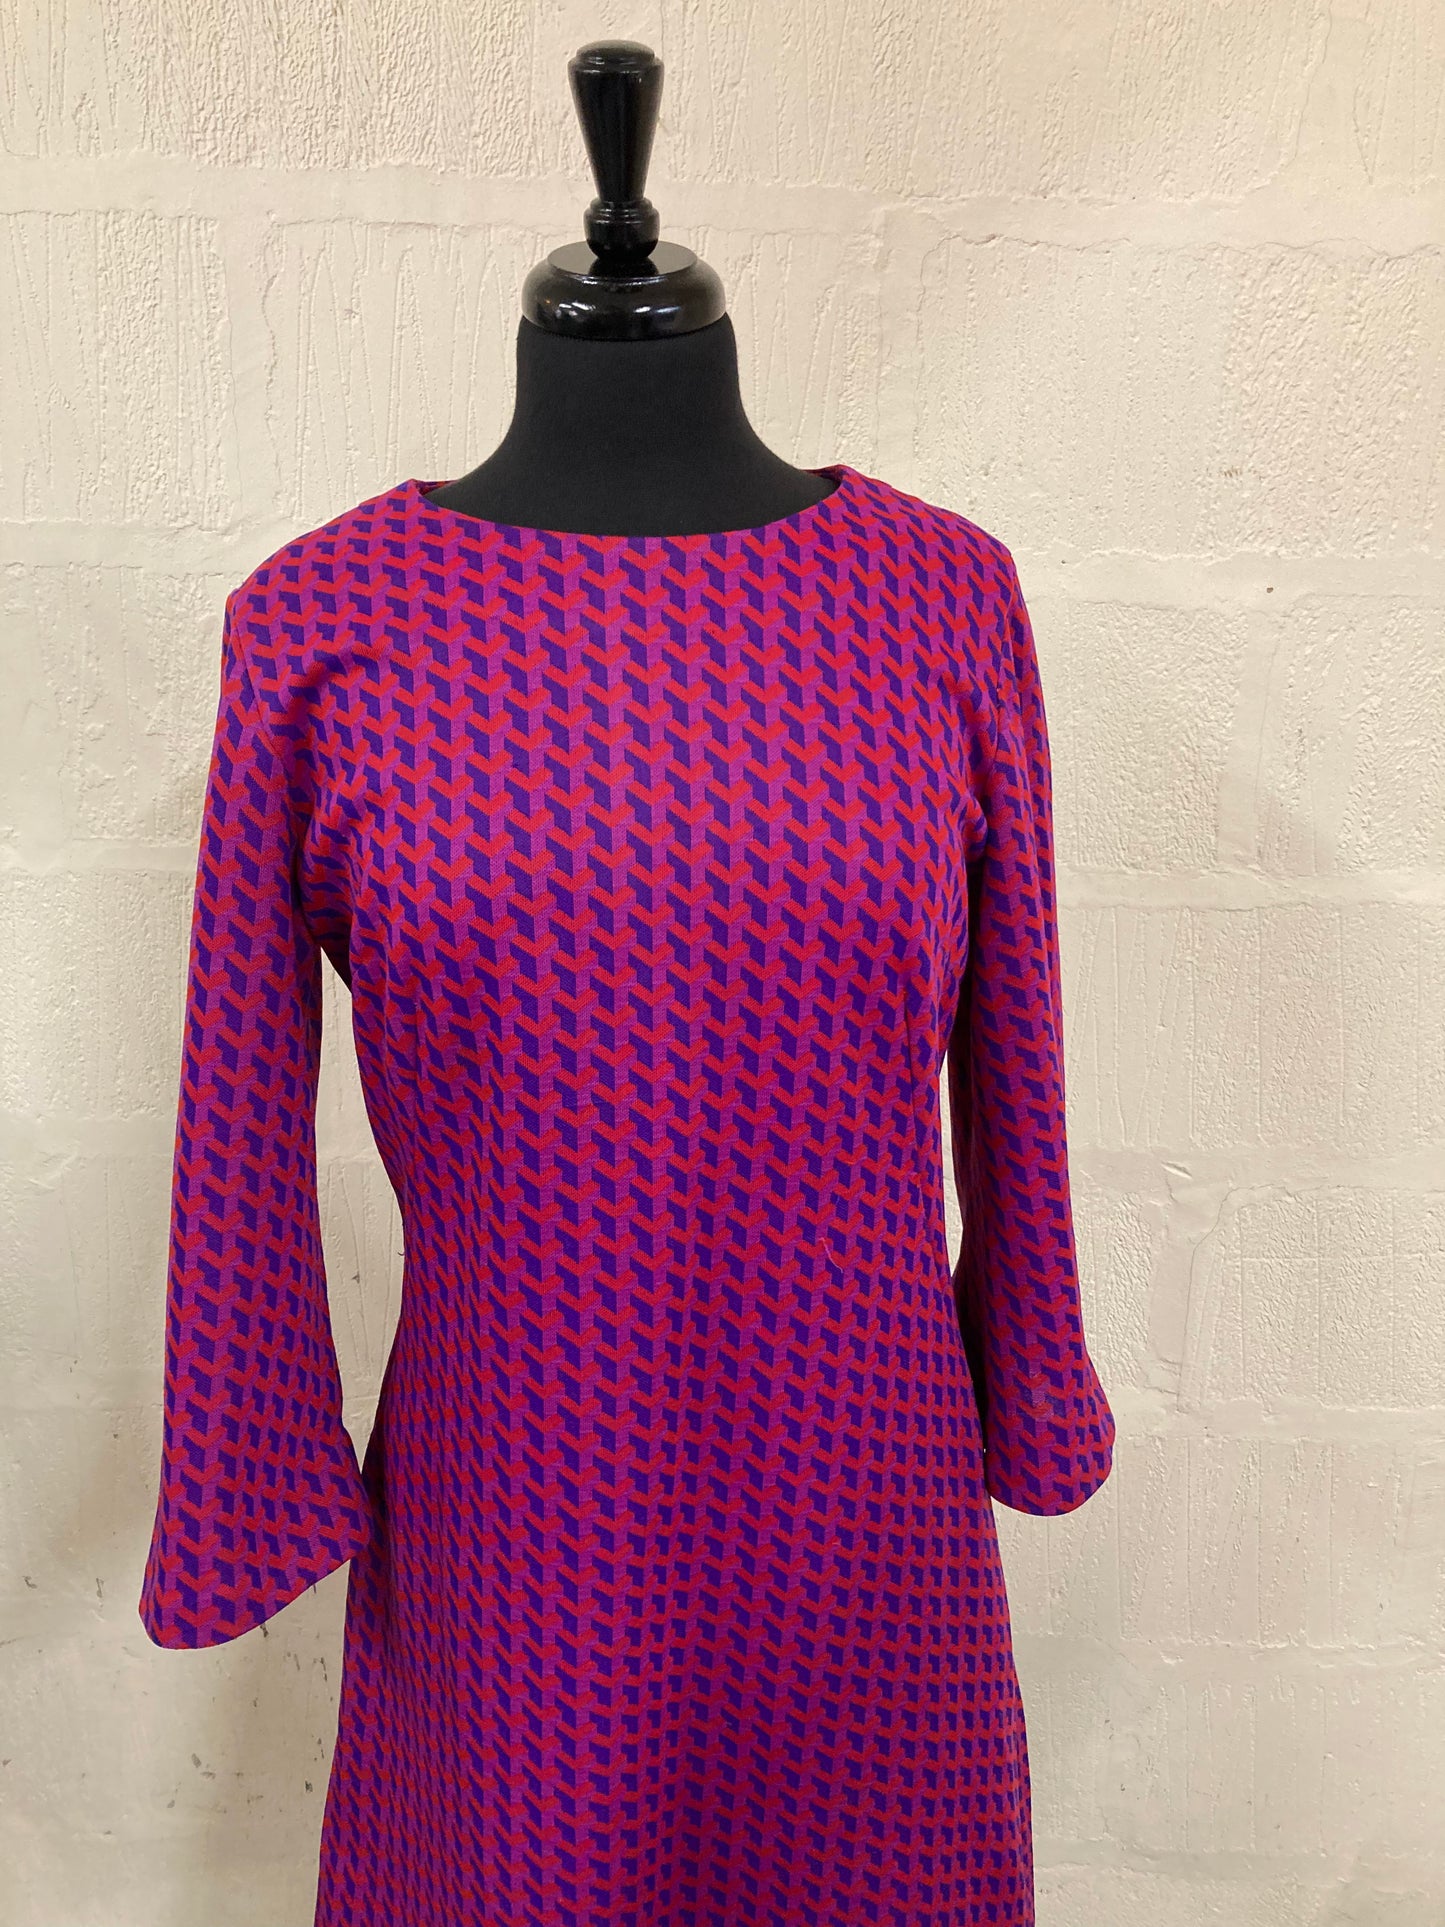 1960s Hand Made Purple and Red Wide Sleeved Dress Size 16